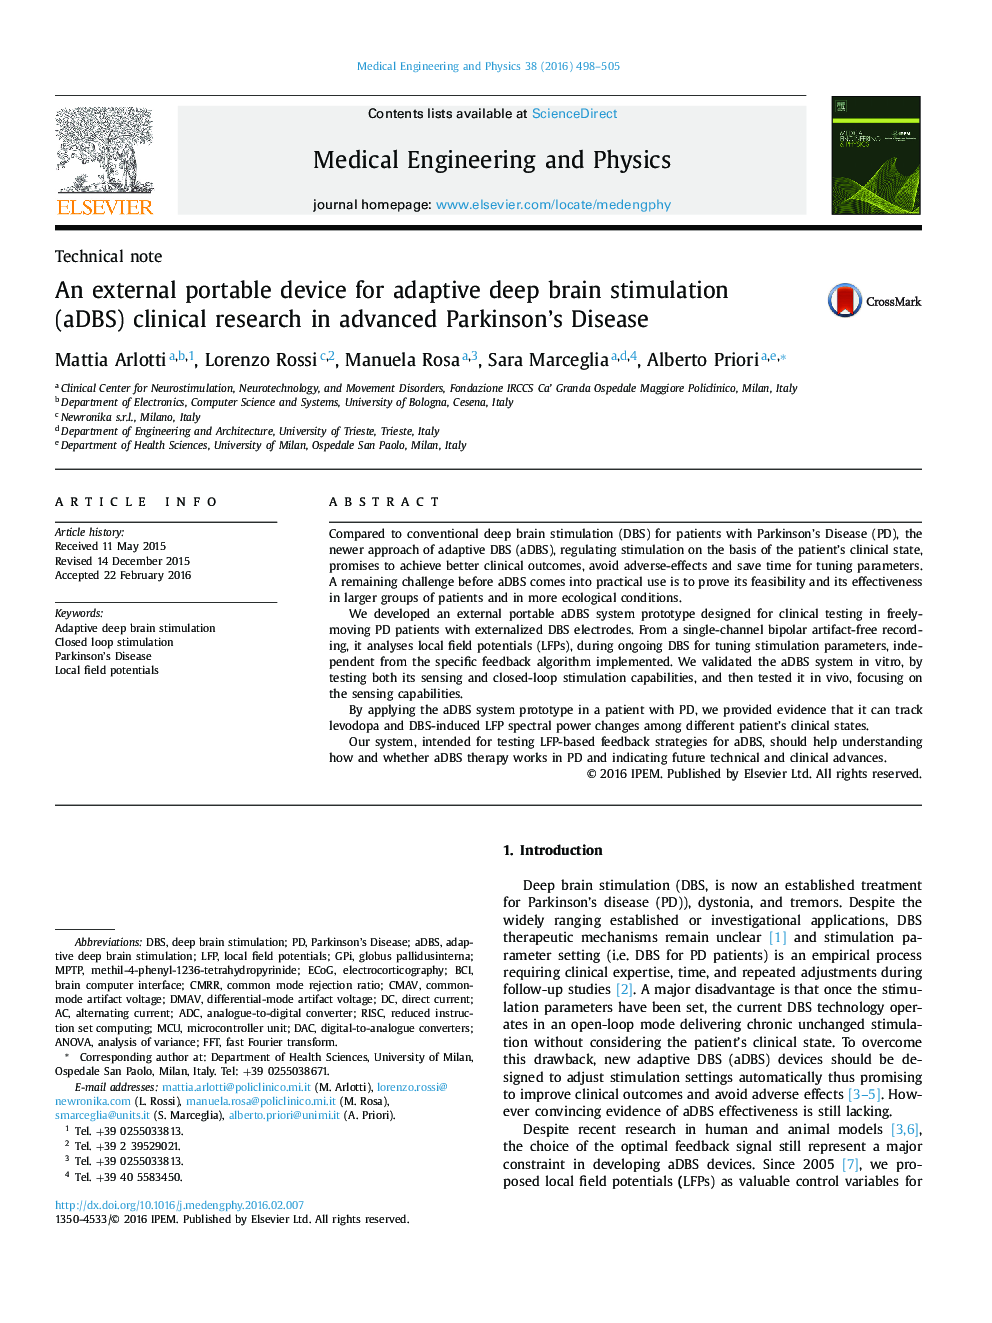 An external portable device for adaptive deep brain stimulation (aDBS) clinical research in advanced Parkinson's Disease